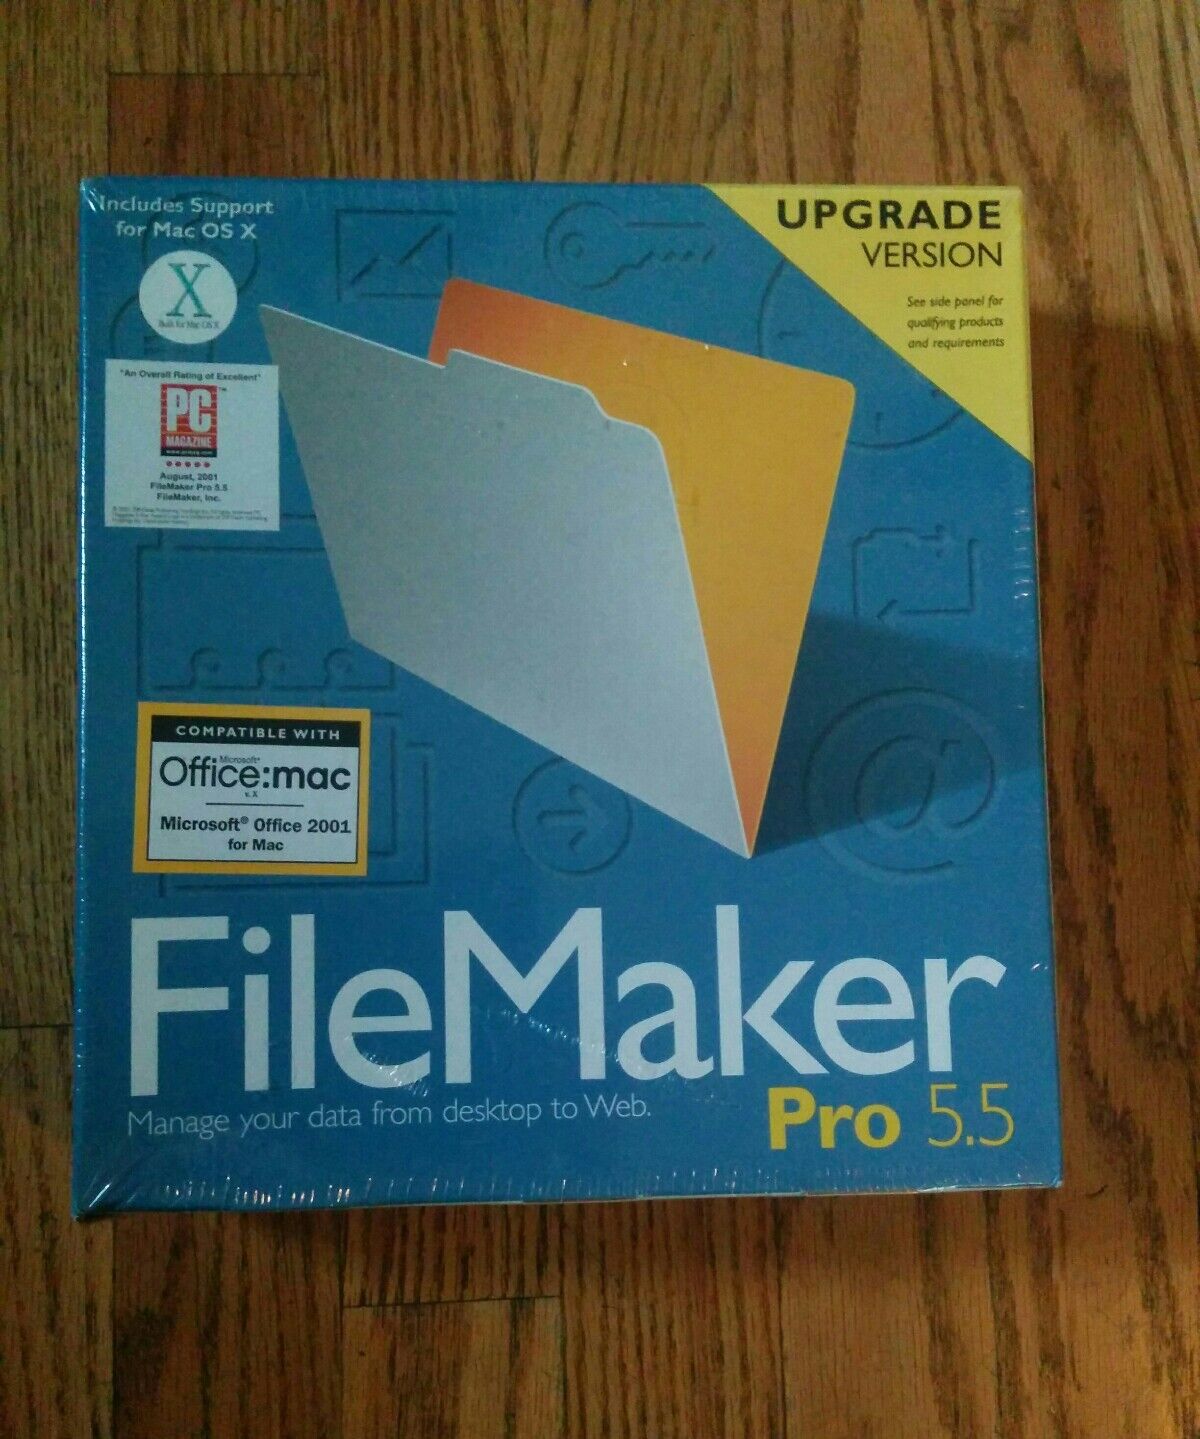 Filemaker Pro 5.5 Upgrade with Serial Number for Mac - NEW